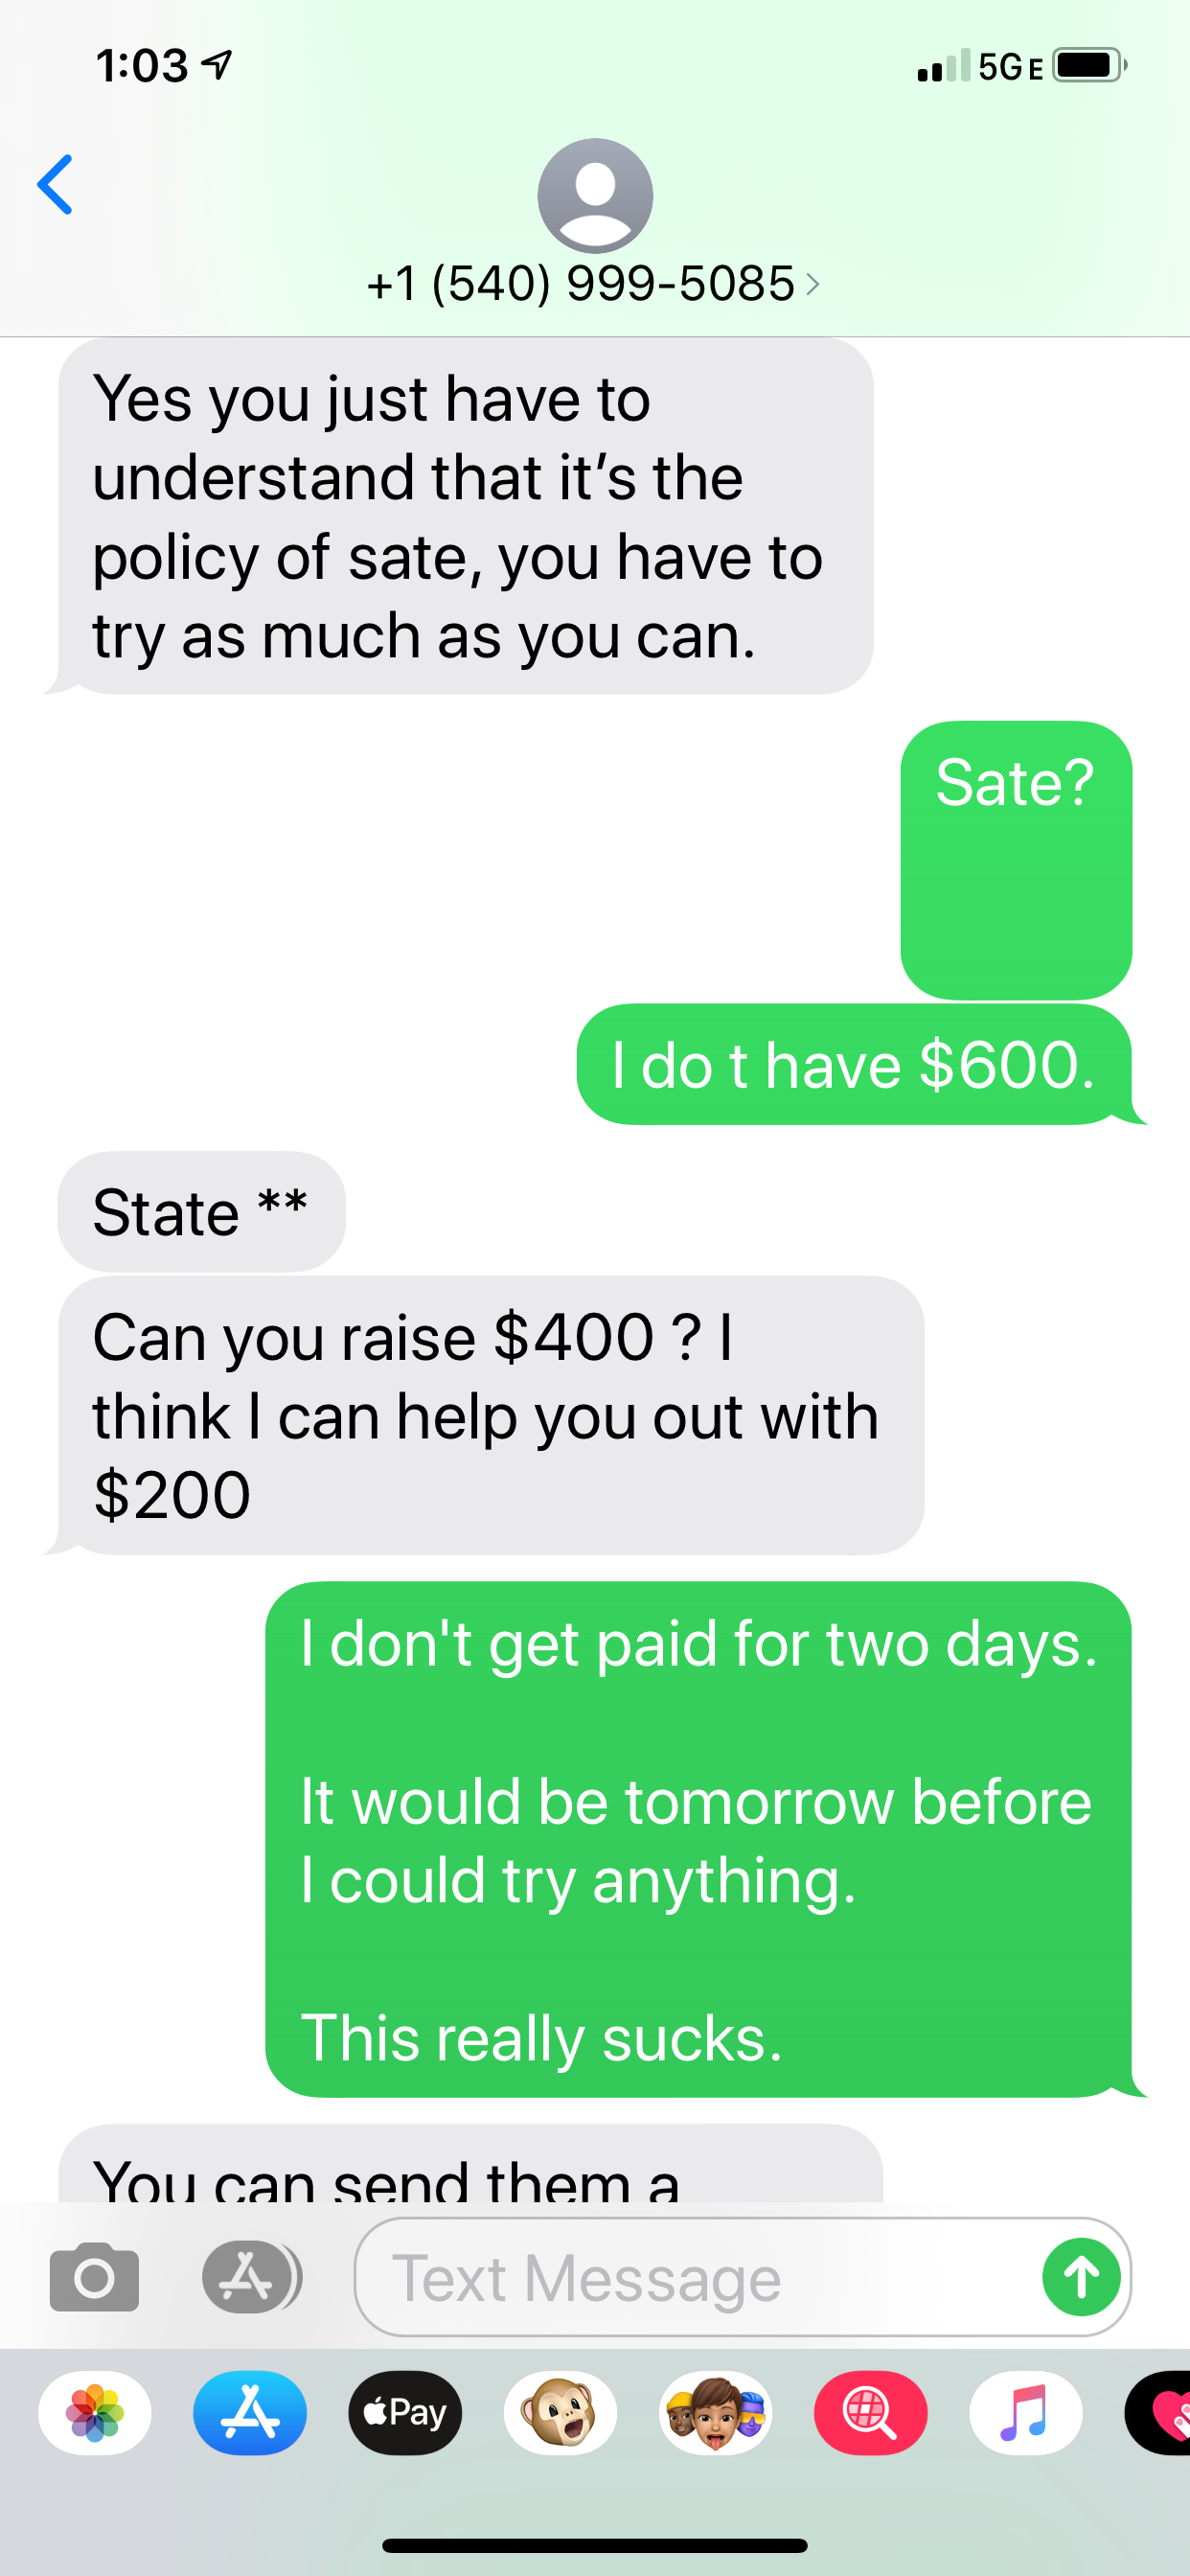 The "seller" even offers to help me pay the $600.